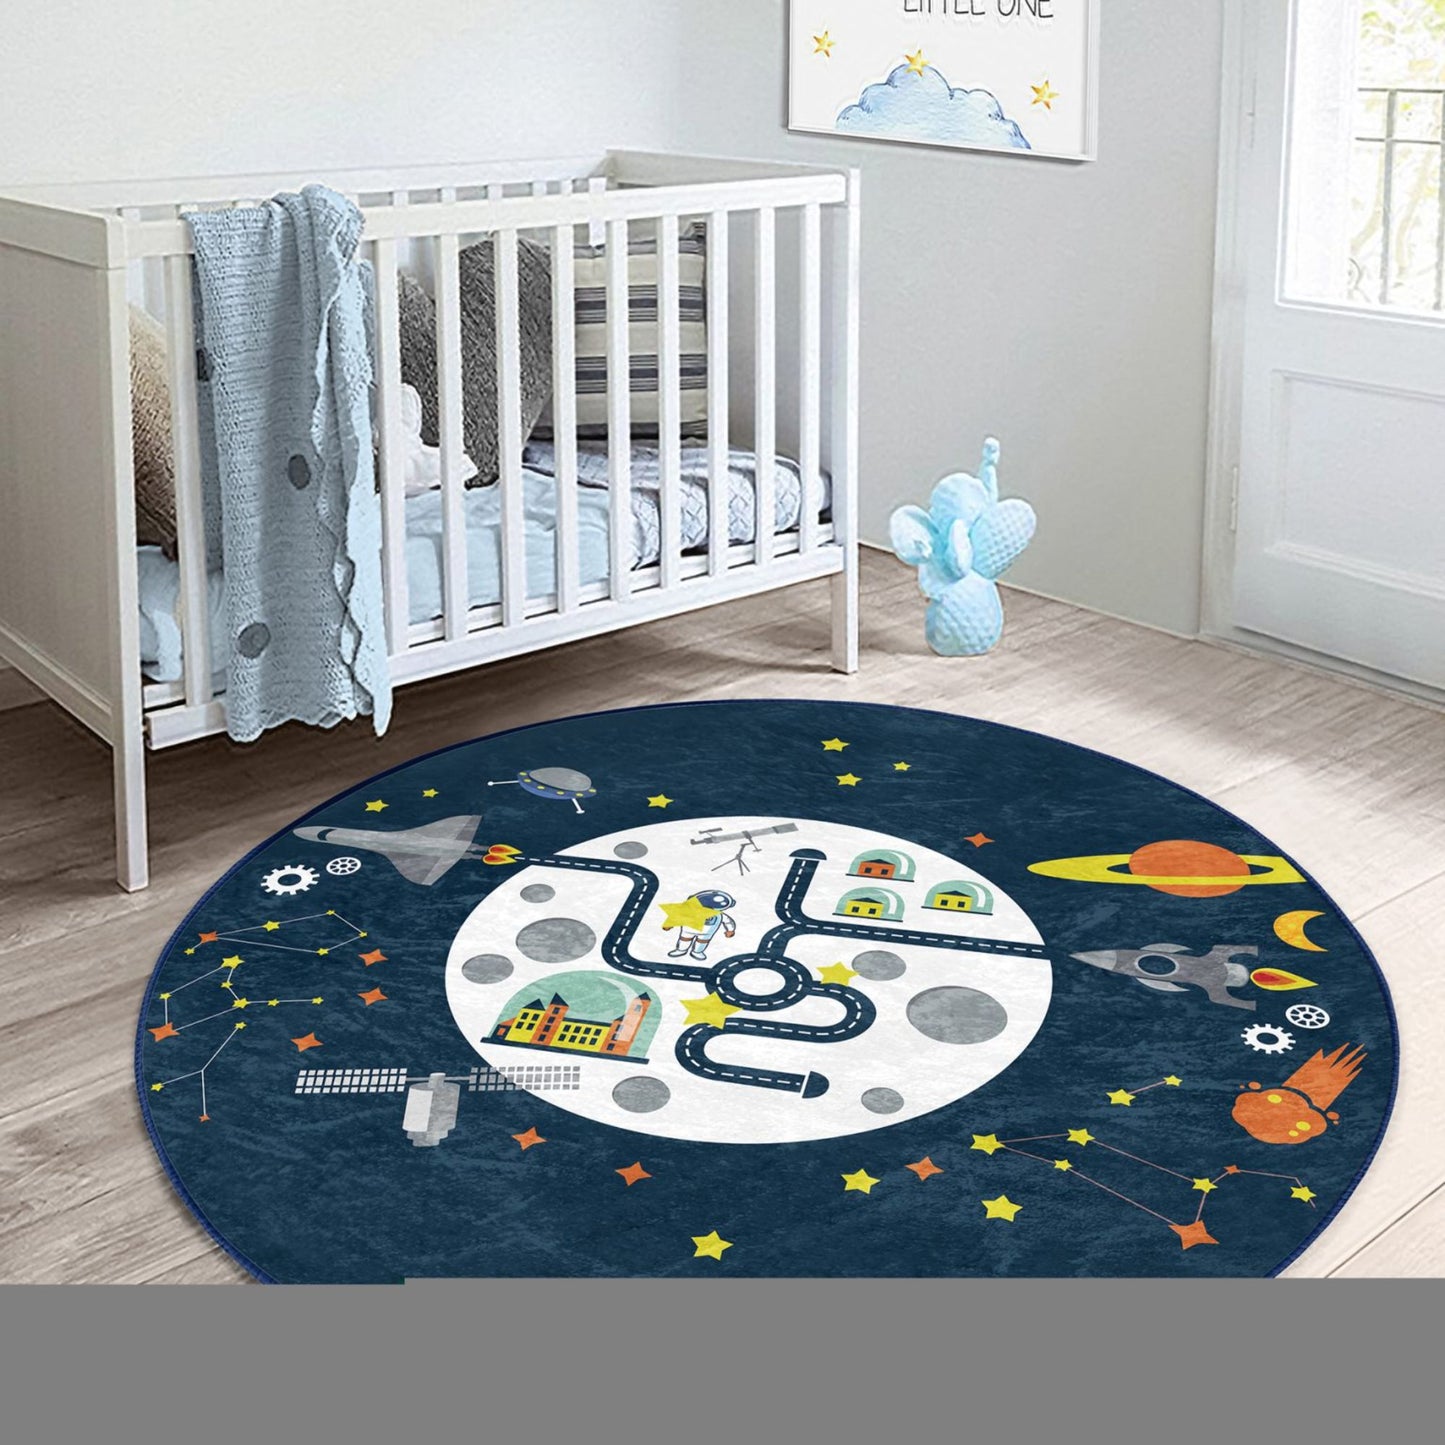 Rug with Space Center Design for Kids' Play Area